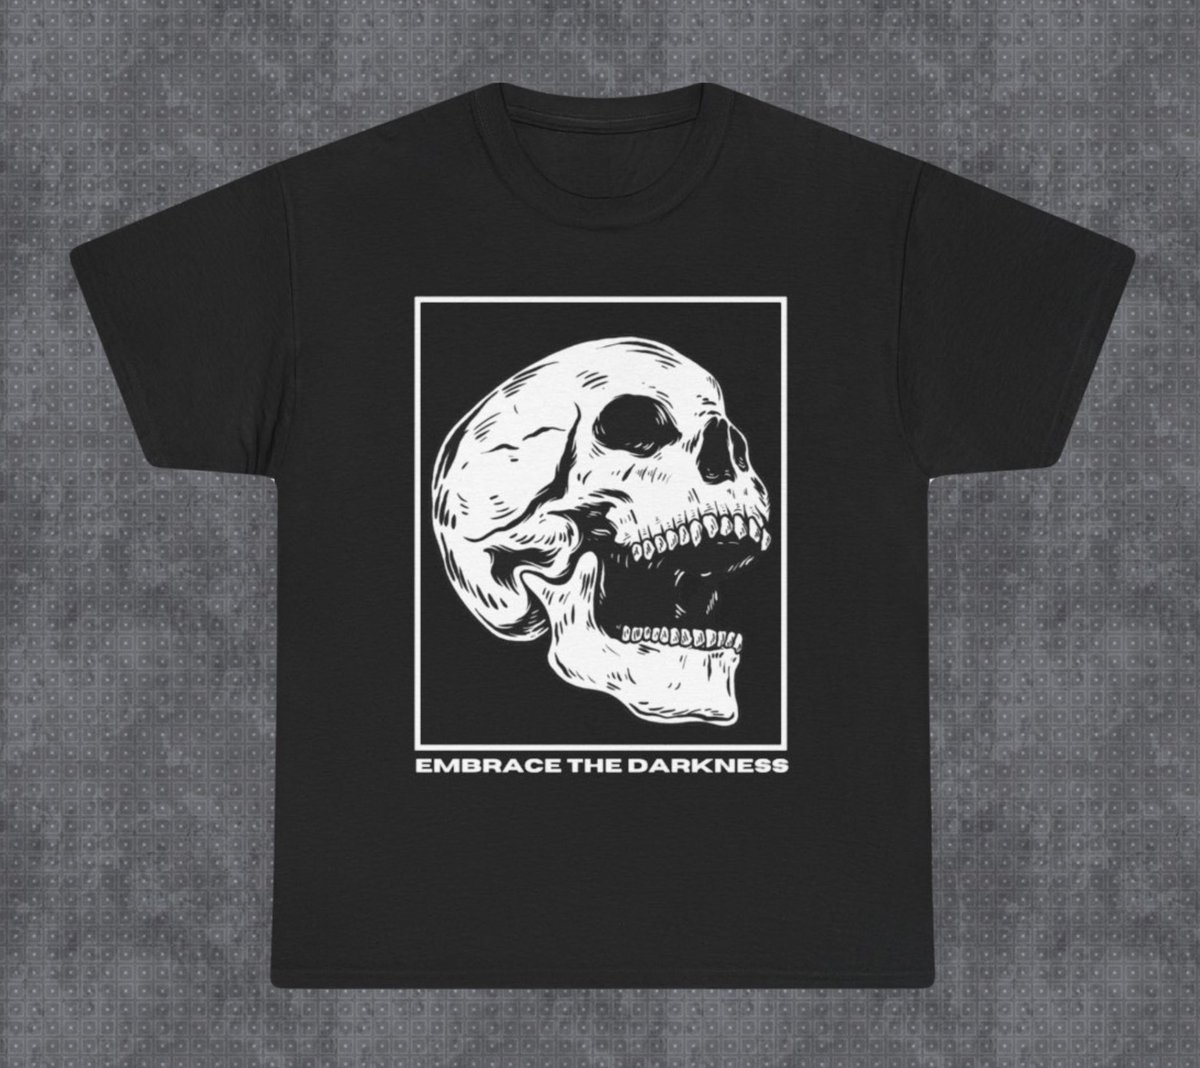 🖤 Shirt Showcase 🖤

The 𝐄𝐦𝐛𝐫𝐚𝐜𝐞 𝐭𝐡𝐞 𝐃𝐚𝐫𝐤𝐧𝐞𝐬𝐬 tee is meant for those who love all things dark and spooky. 

Find it here: house-of-horrors.printify.me/product/787396…